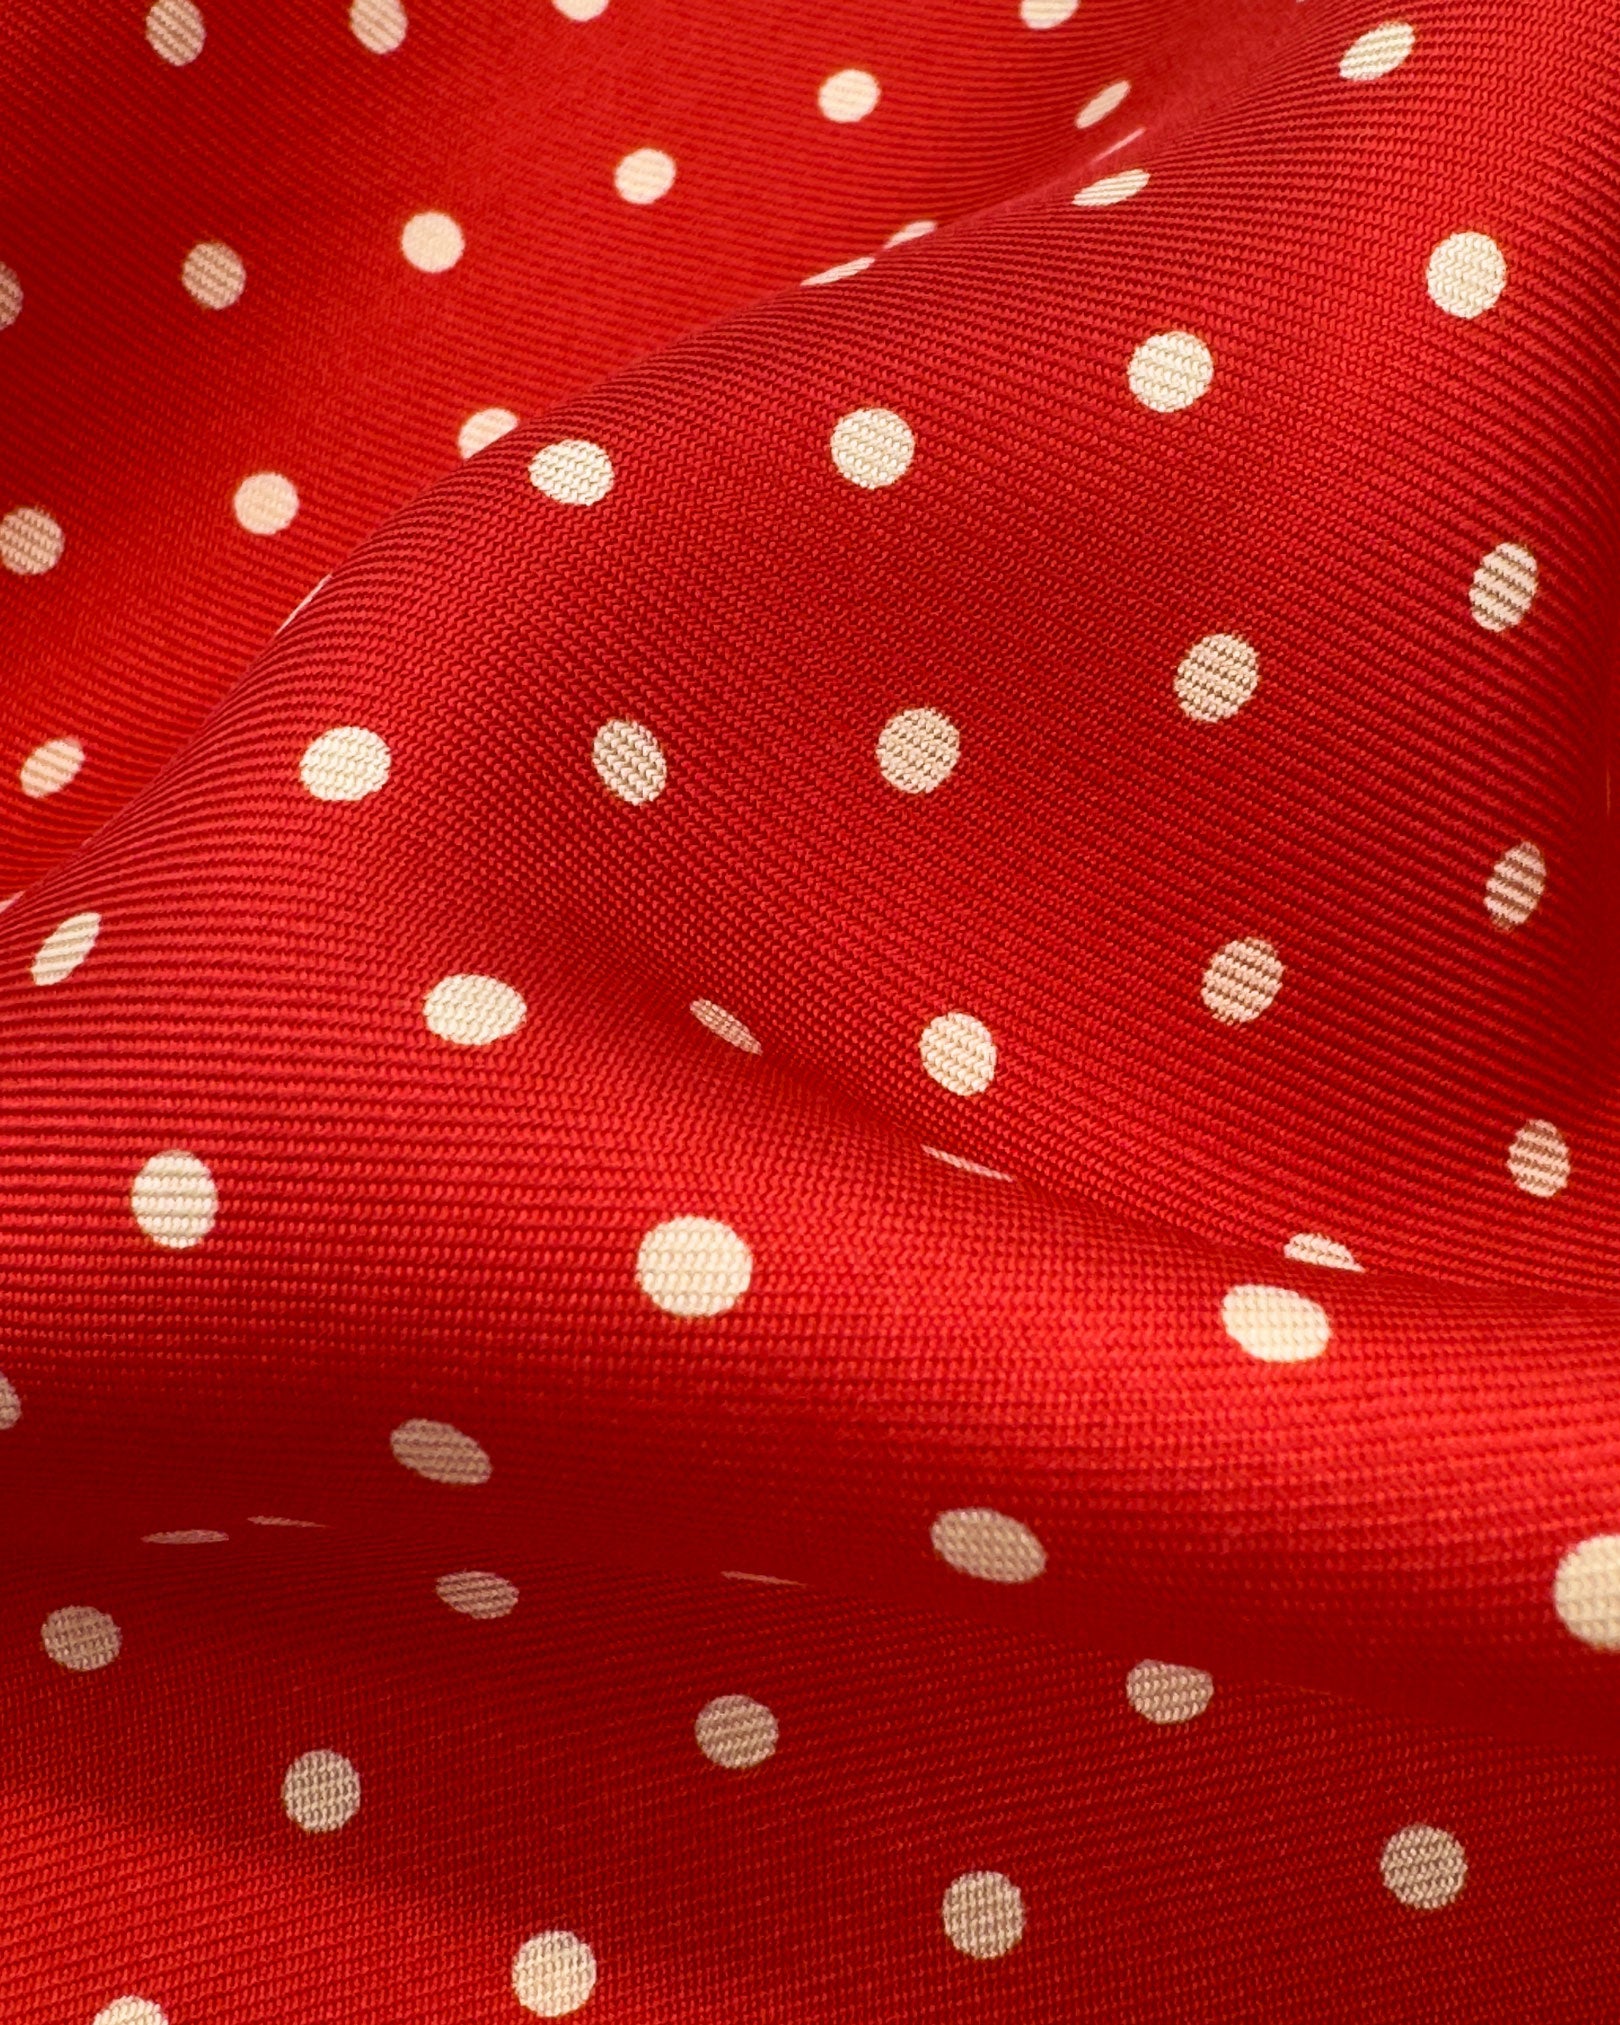 A ruffled close-up of the 'Hastings' pocket square, presenting a closer view of the white polka dots against the attractive lustre of the deadstock silk material. 